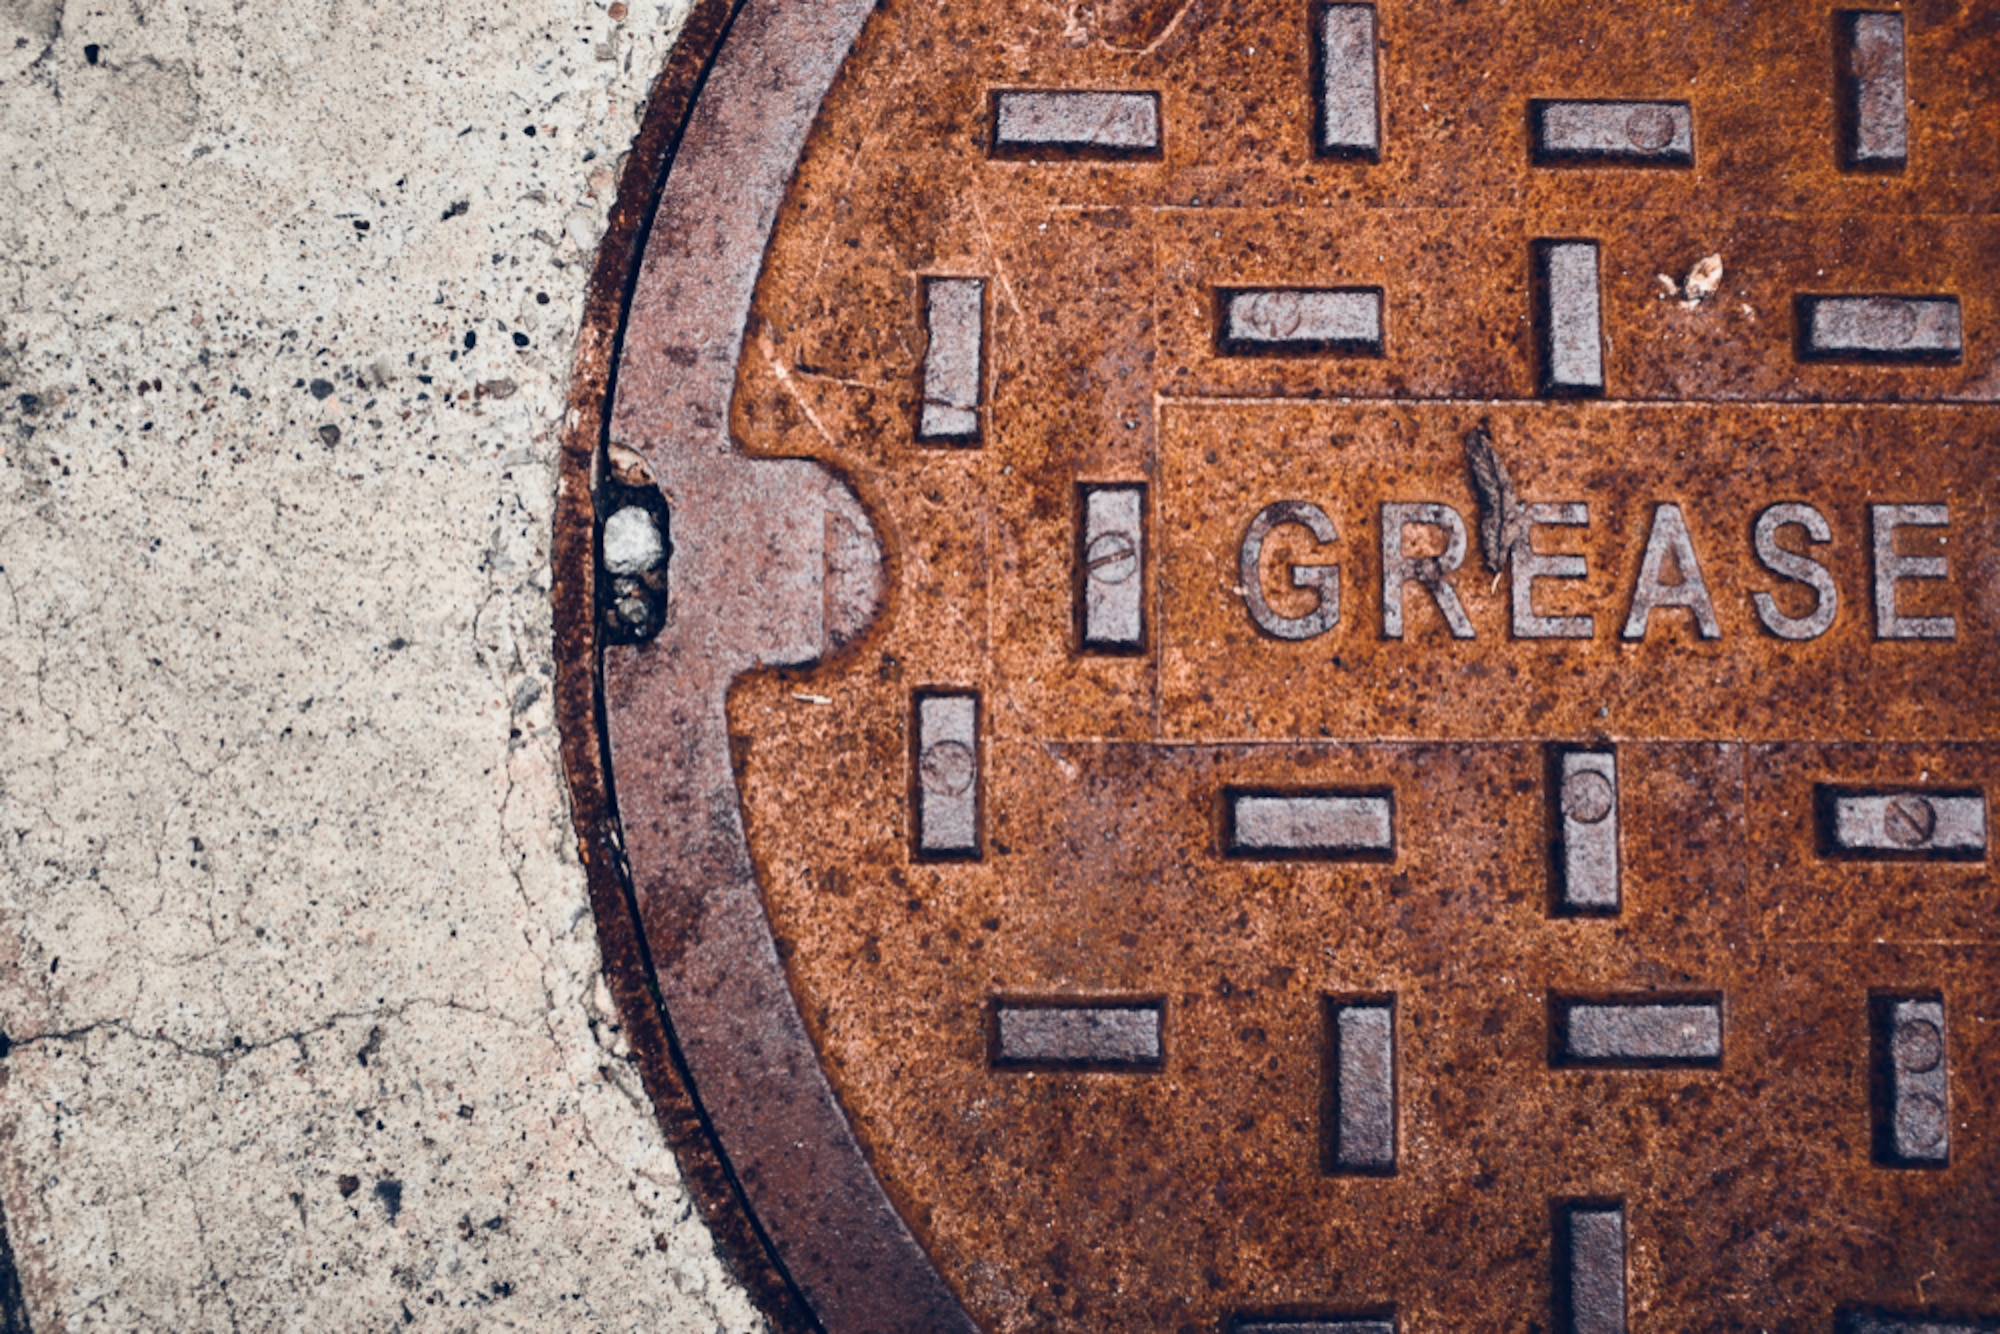 Cease the Grease: Oils and greases do not belong in the drain